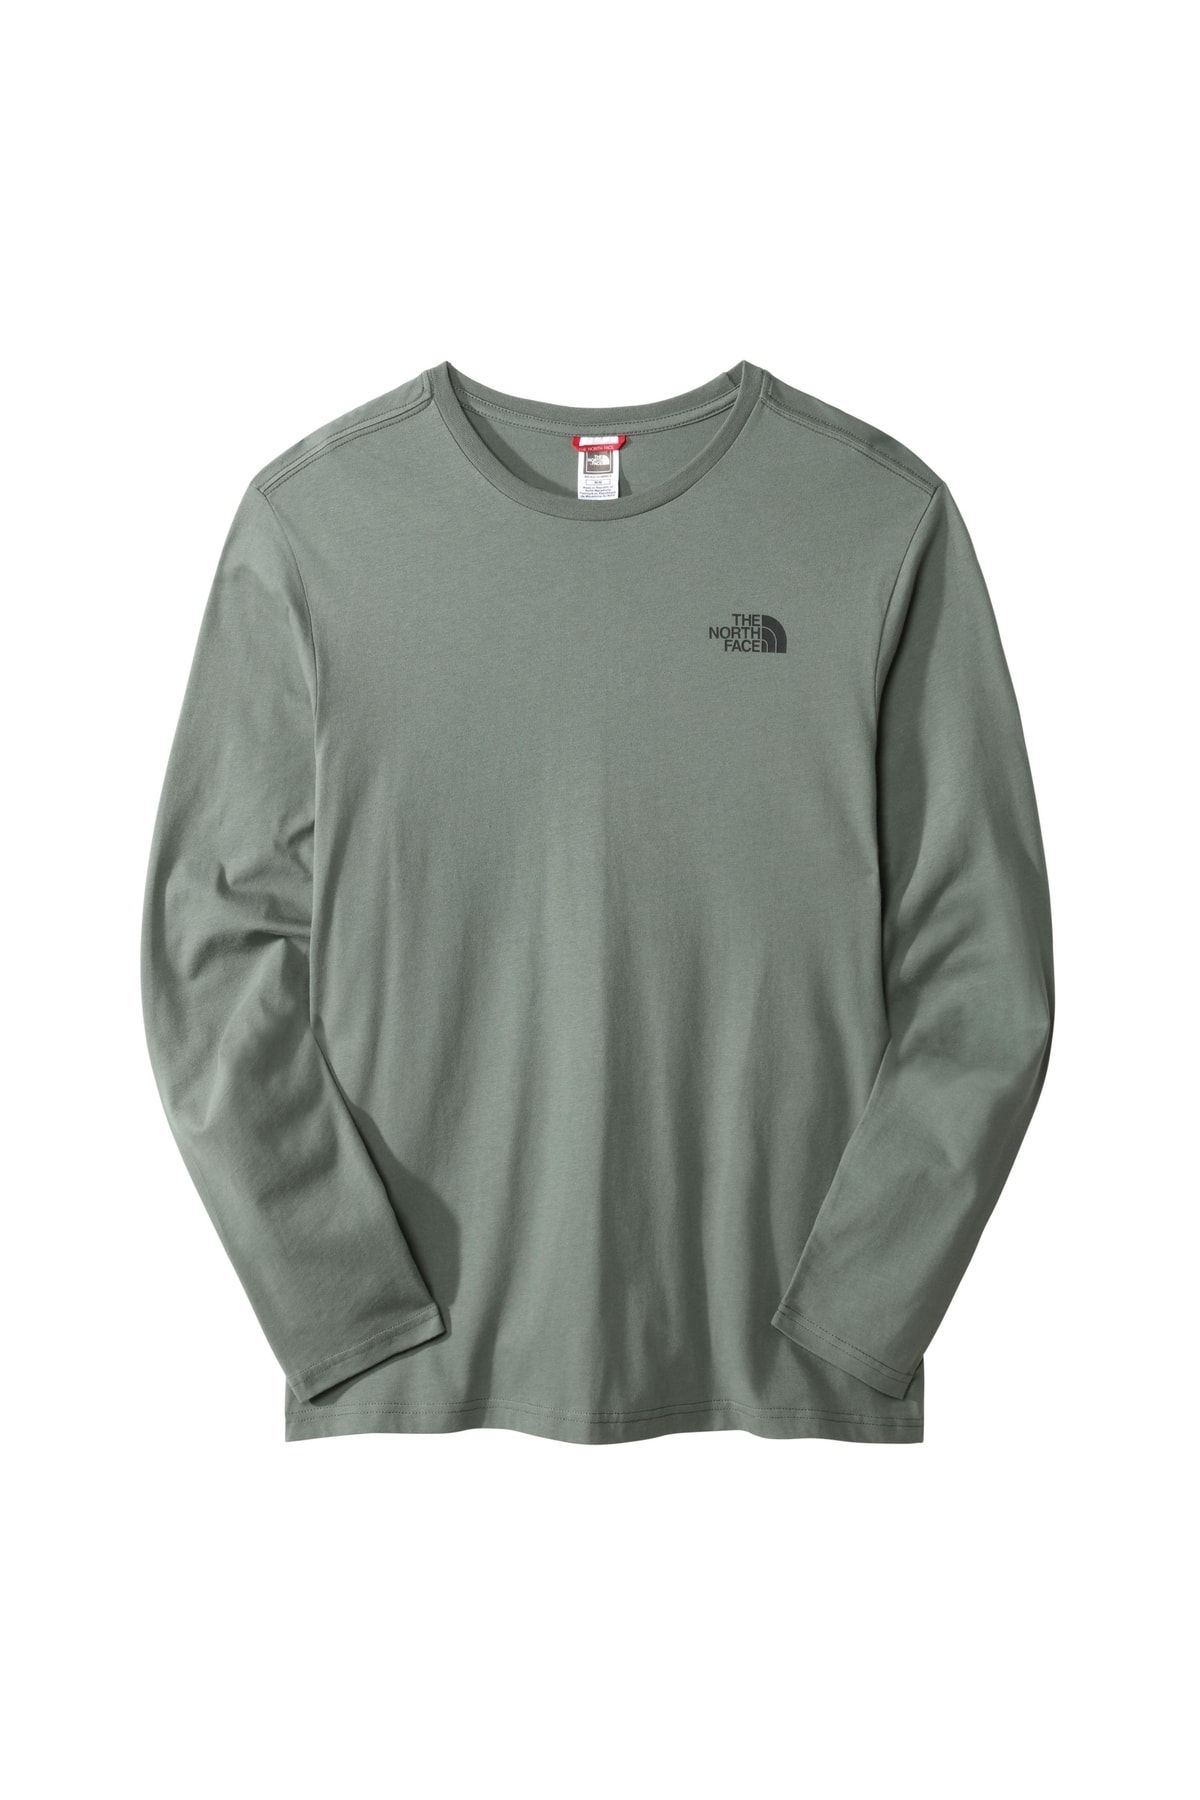 The North Face M L/s Easy Tee - Eu - Nf0a2tx1nyc1